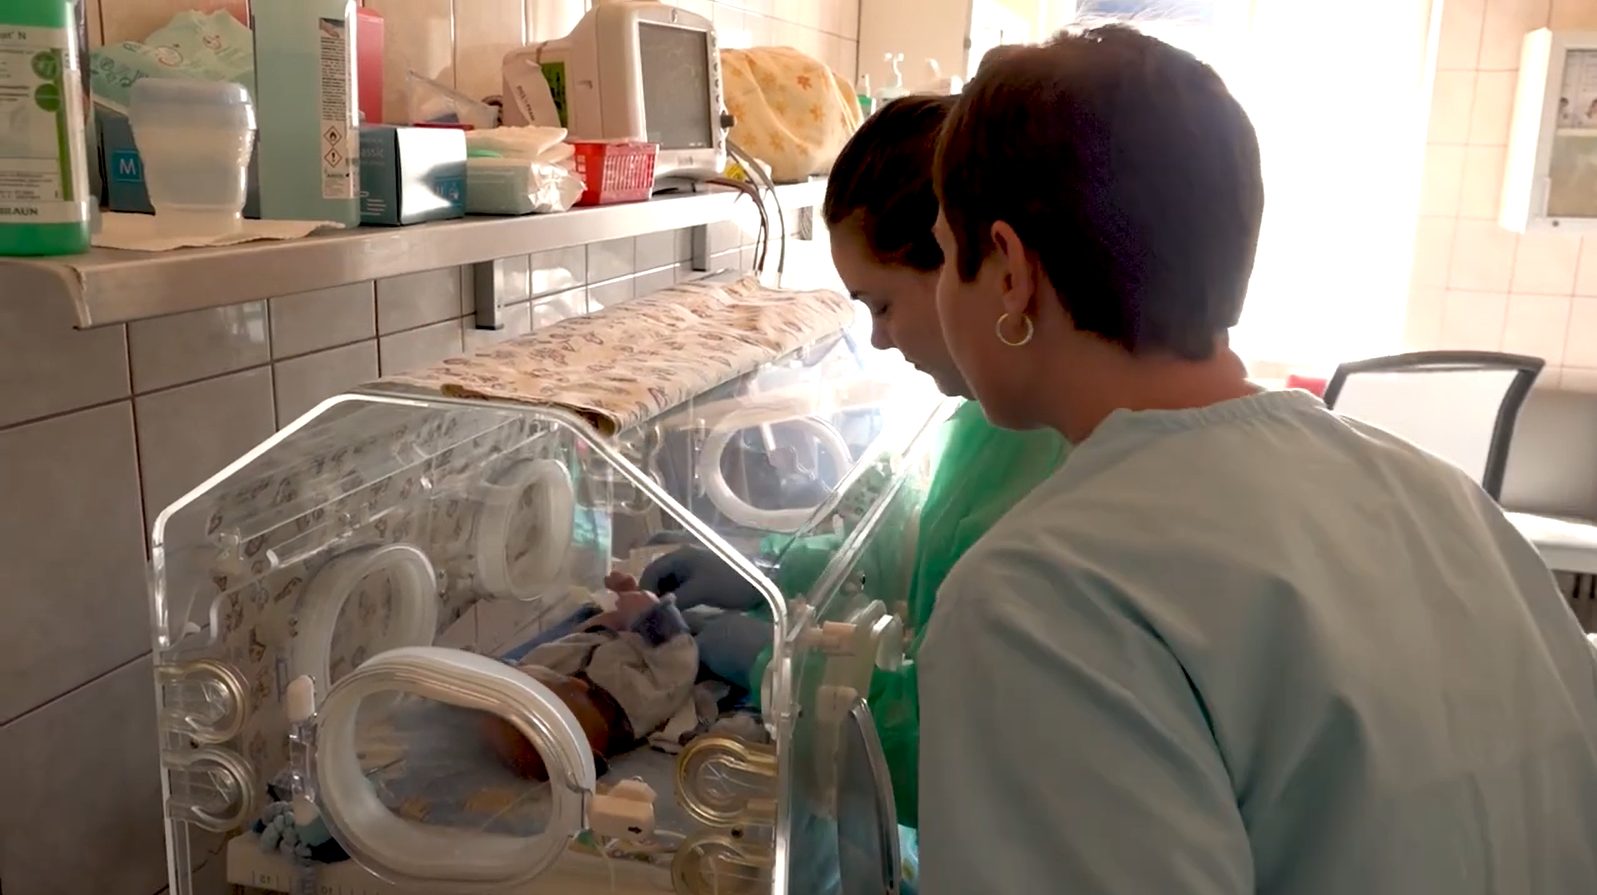 Early Childhood Centre: help for families with premature babies